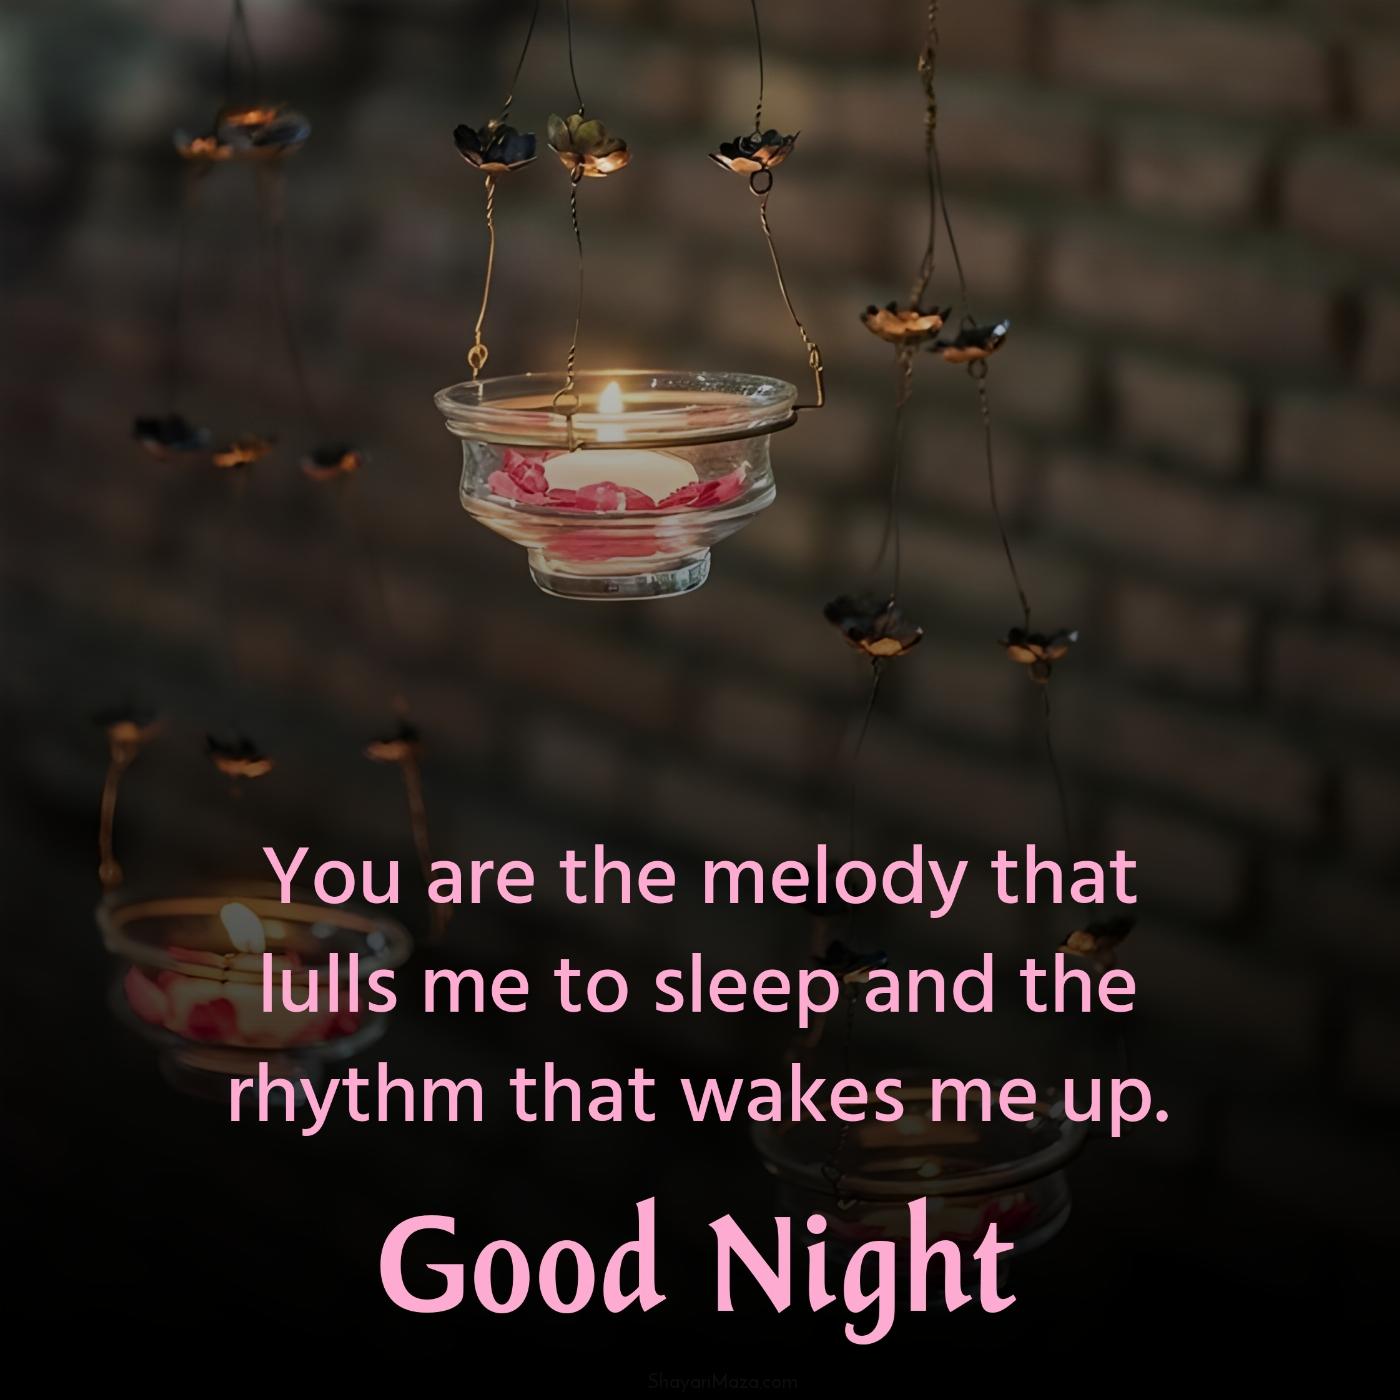 You are the melody that lulls me to sleep